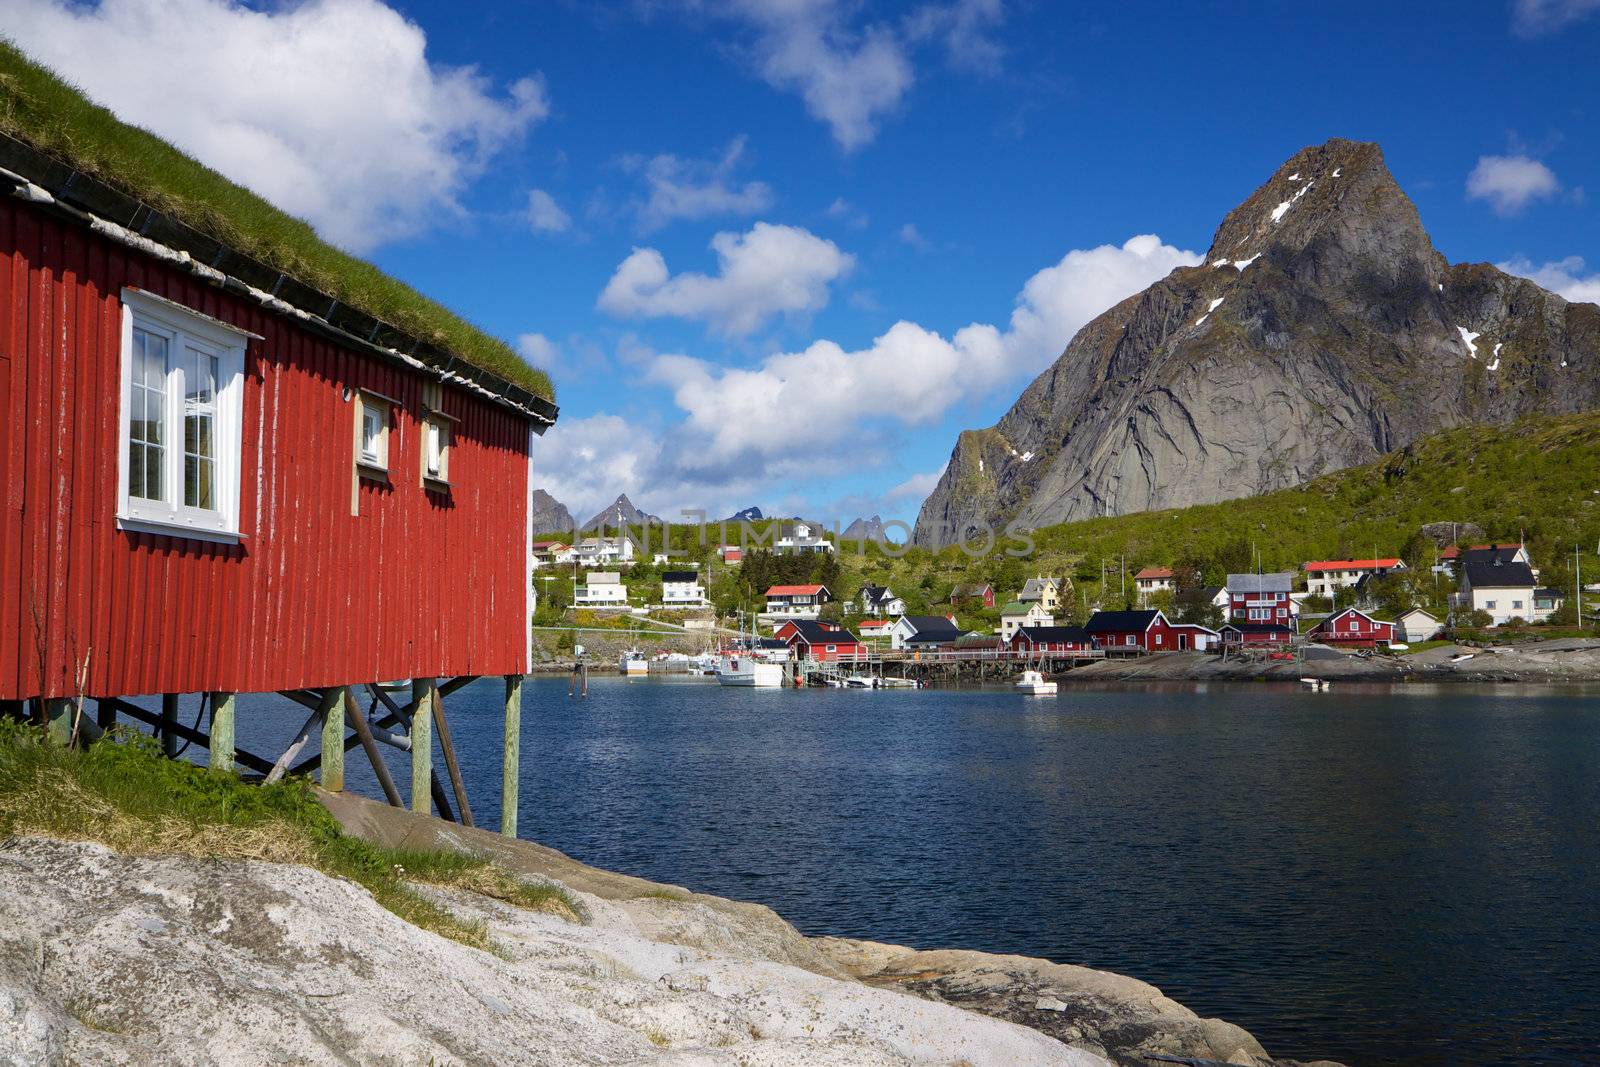 Typical red rorbu hut with sod roof in a picturesque town of Reine on Lofoten islands in Norway